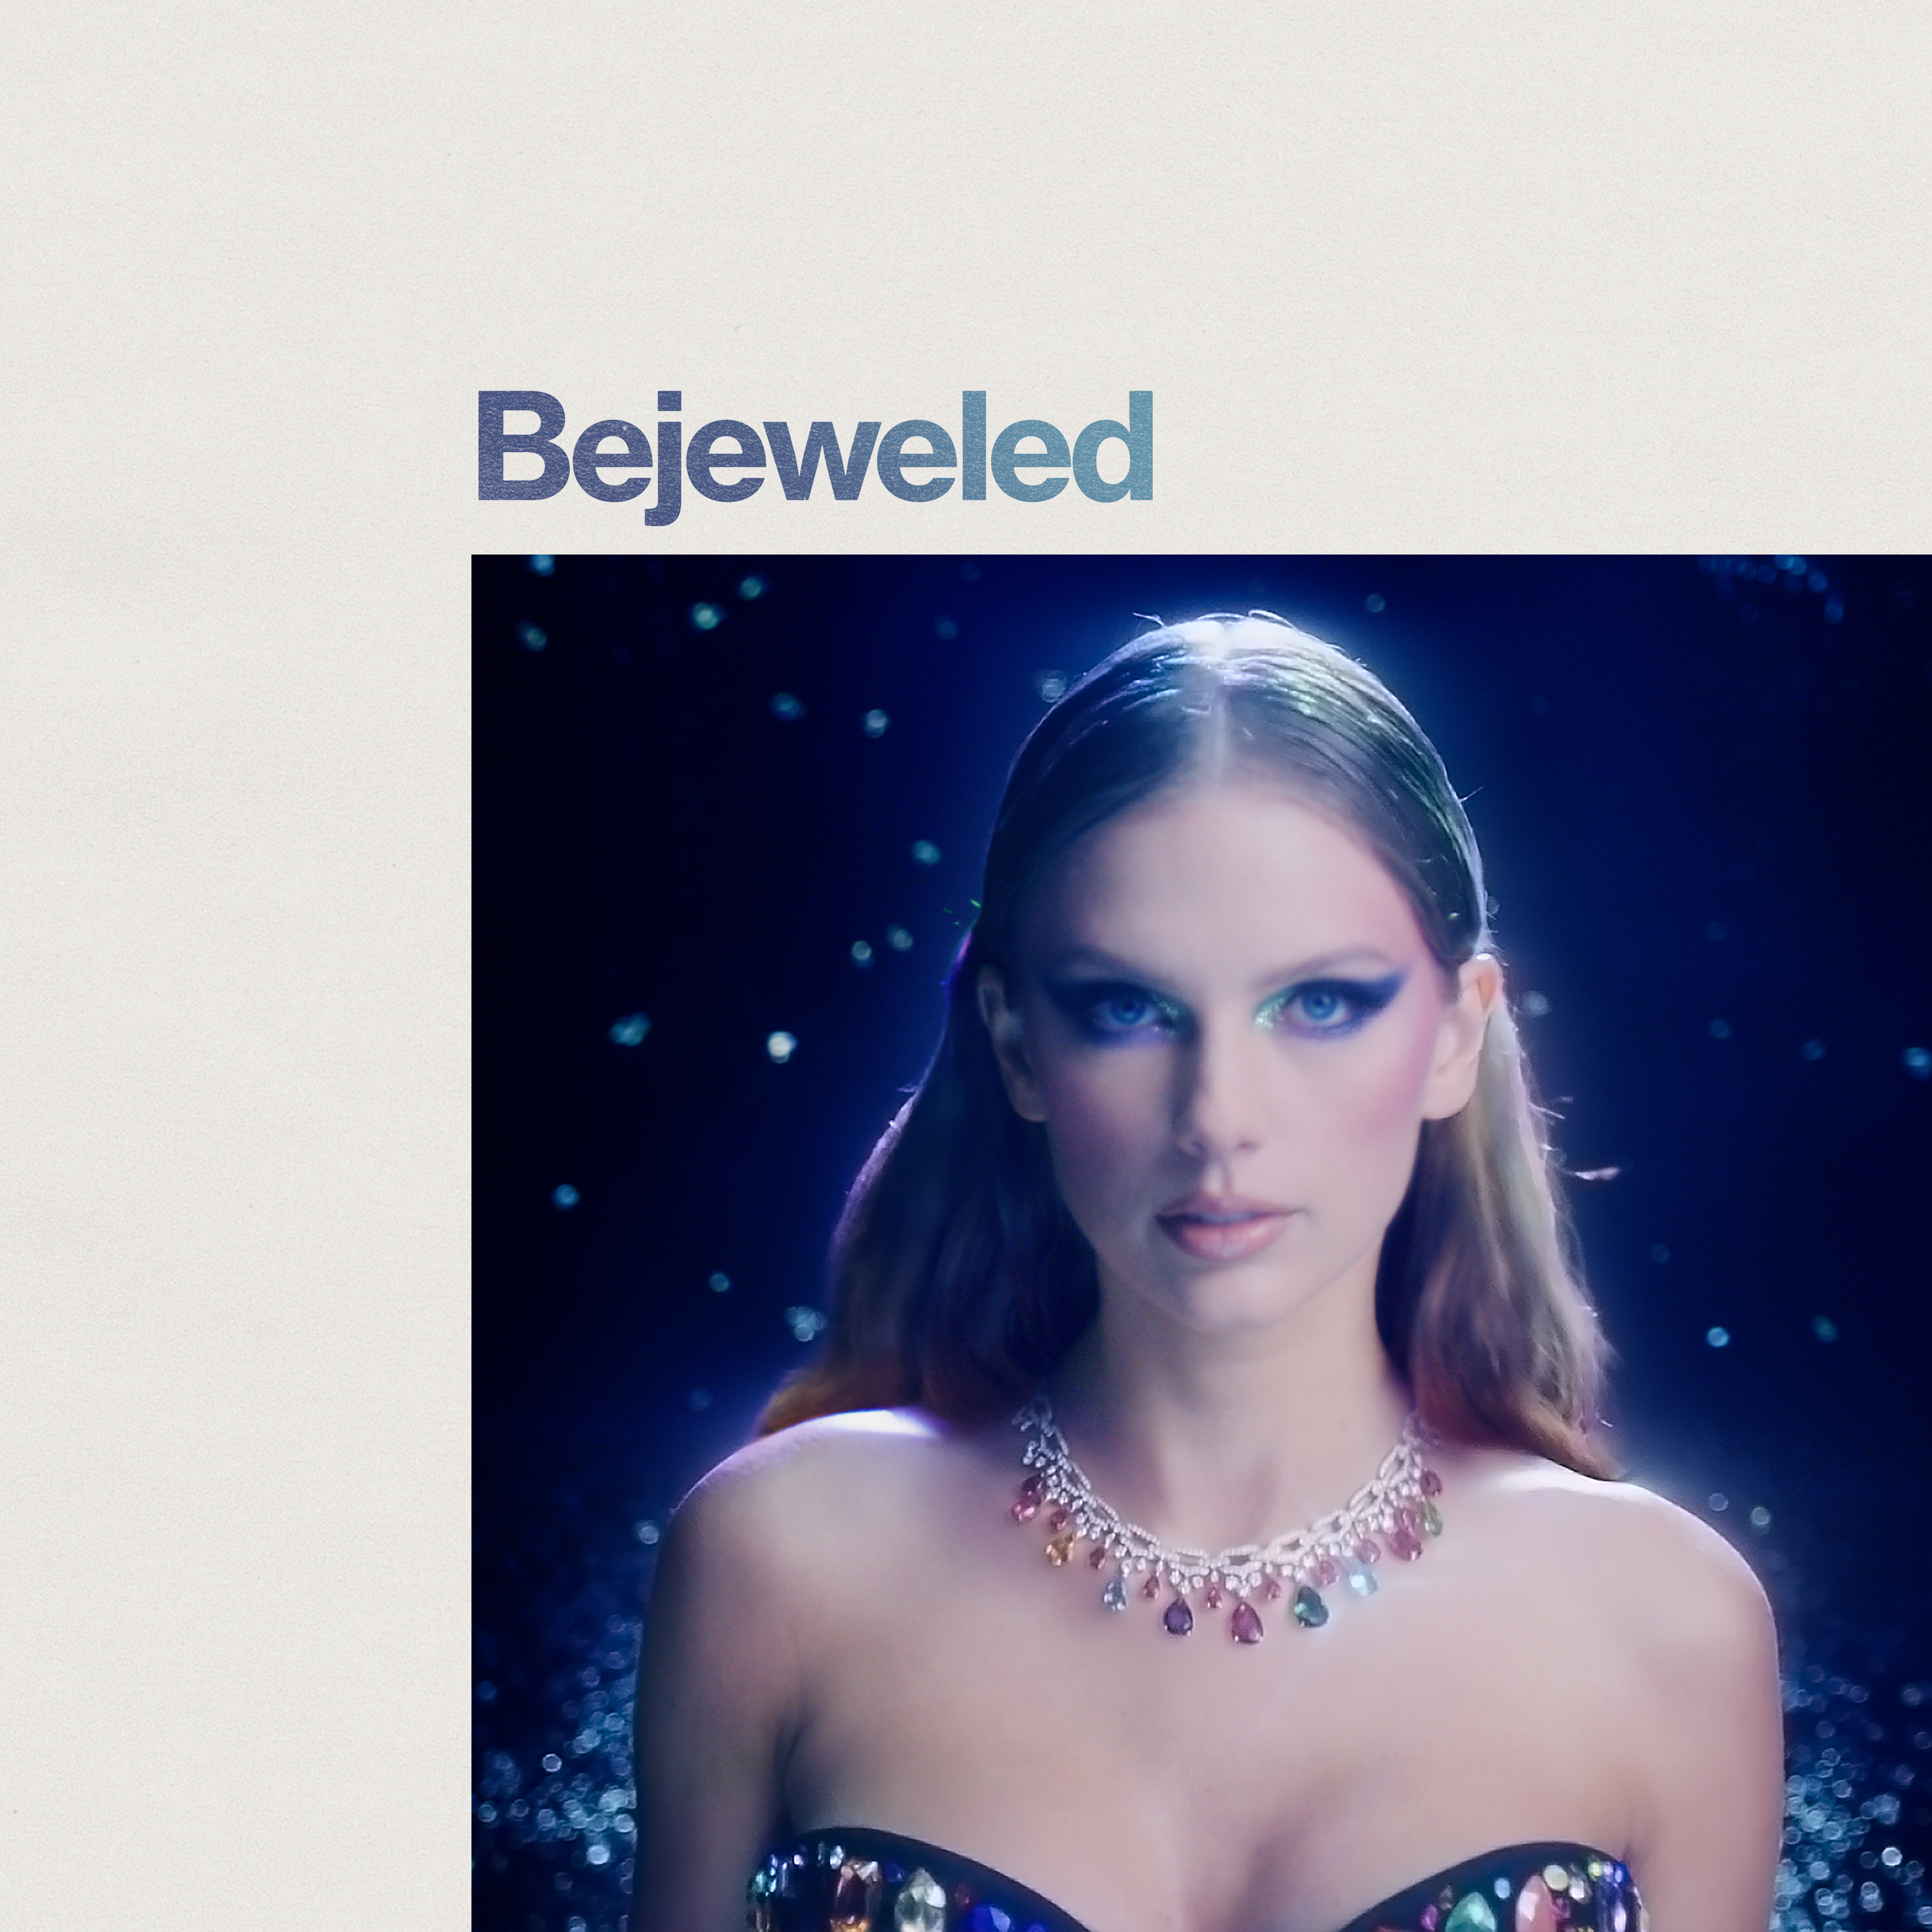 Taylor Swift Bejeweled cover artwork